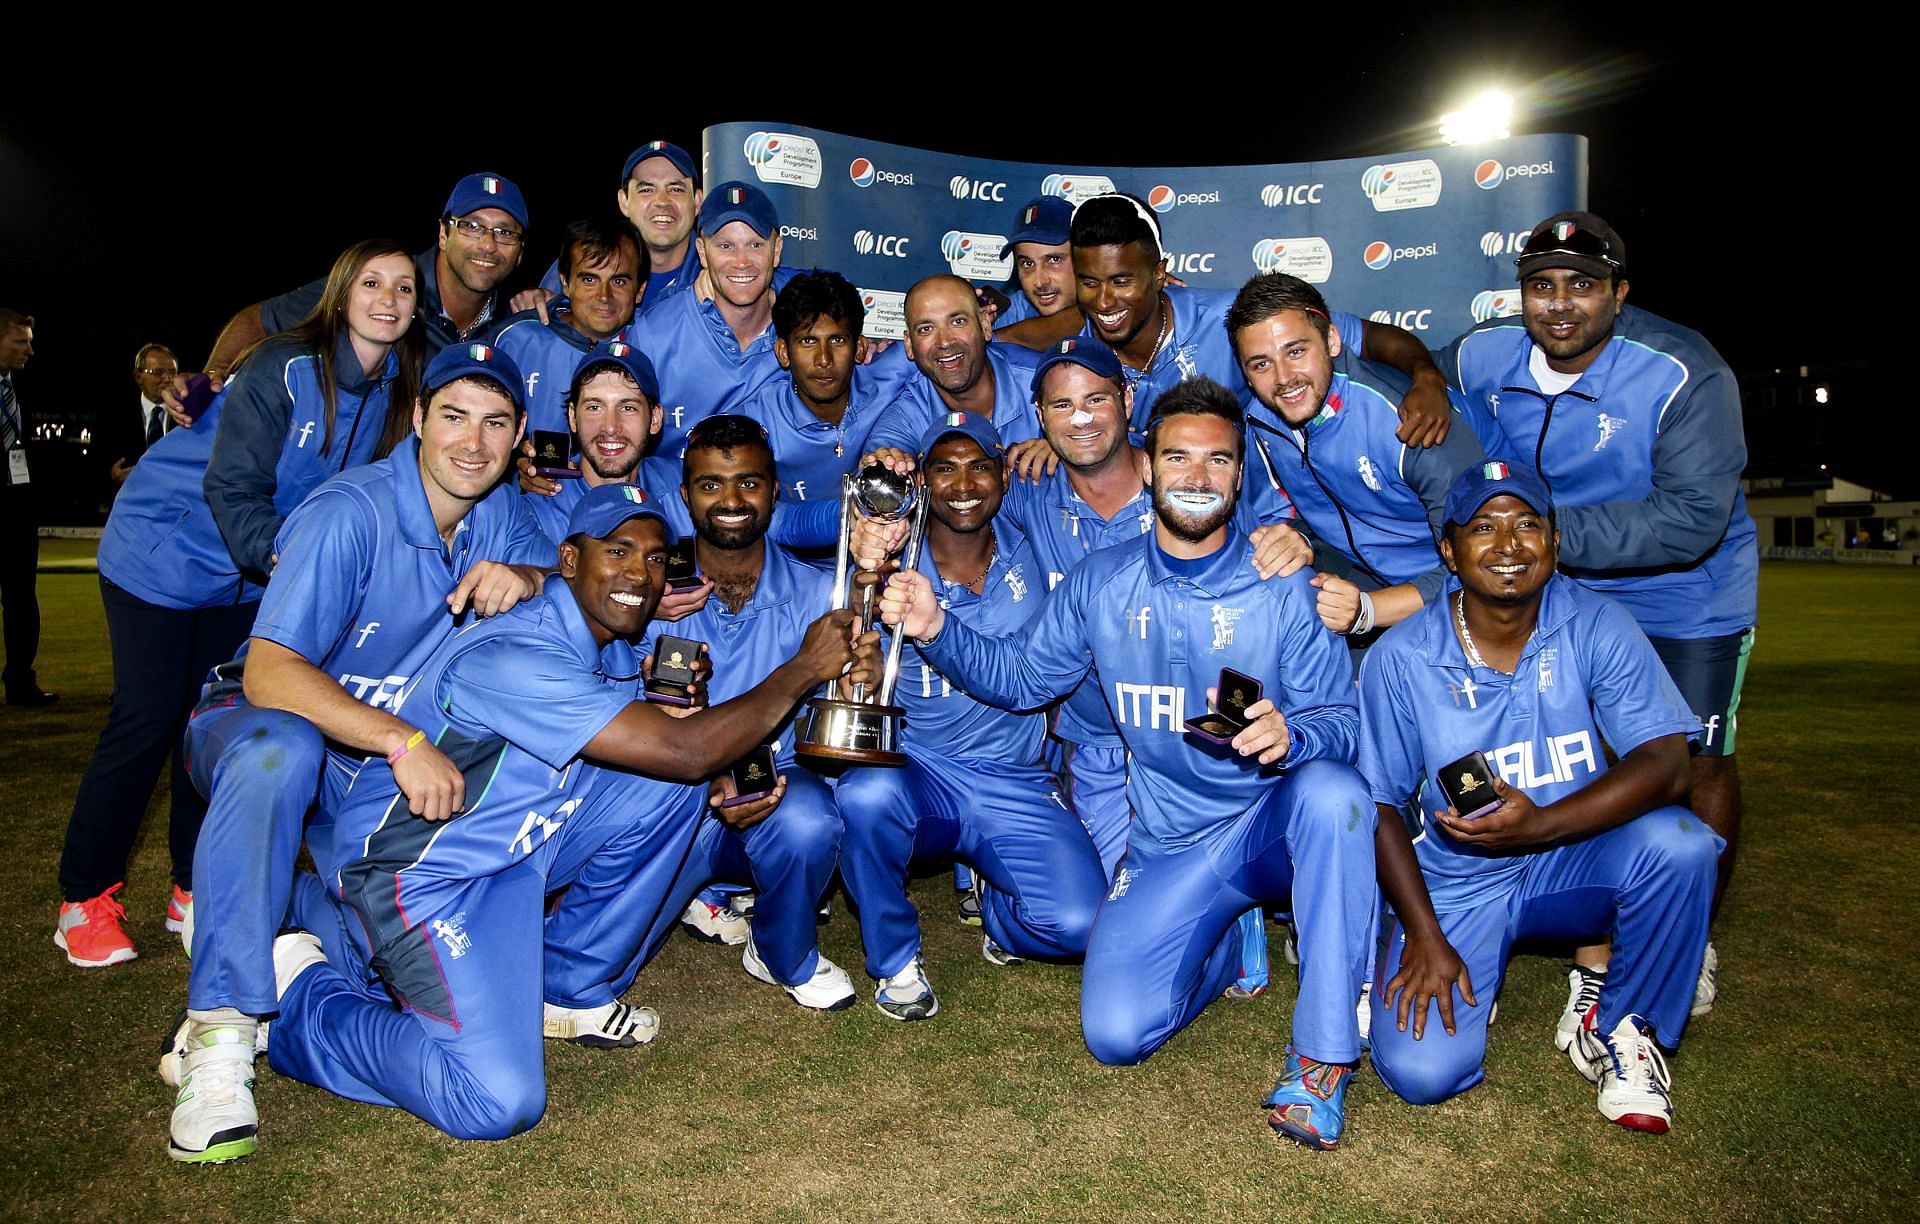 Italy with the ICC European Division 1 Trophy